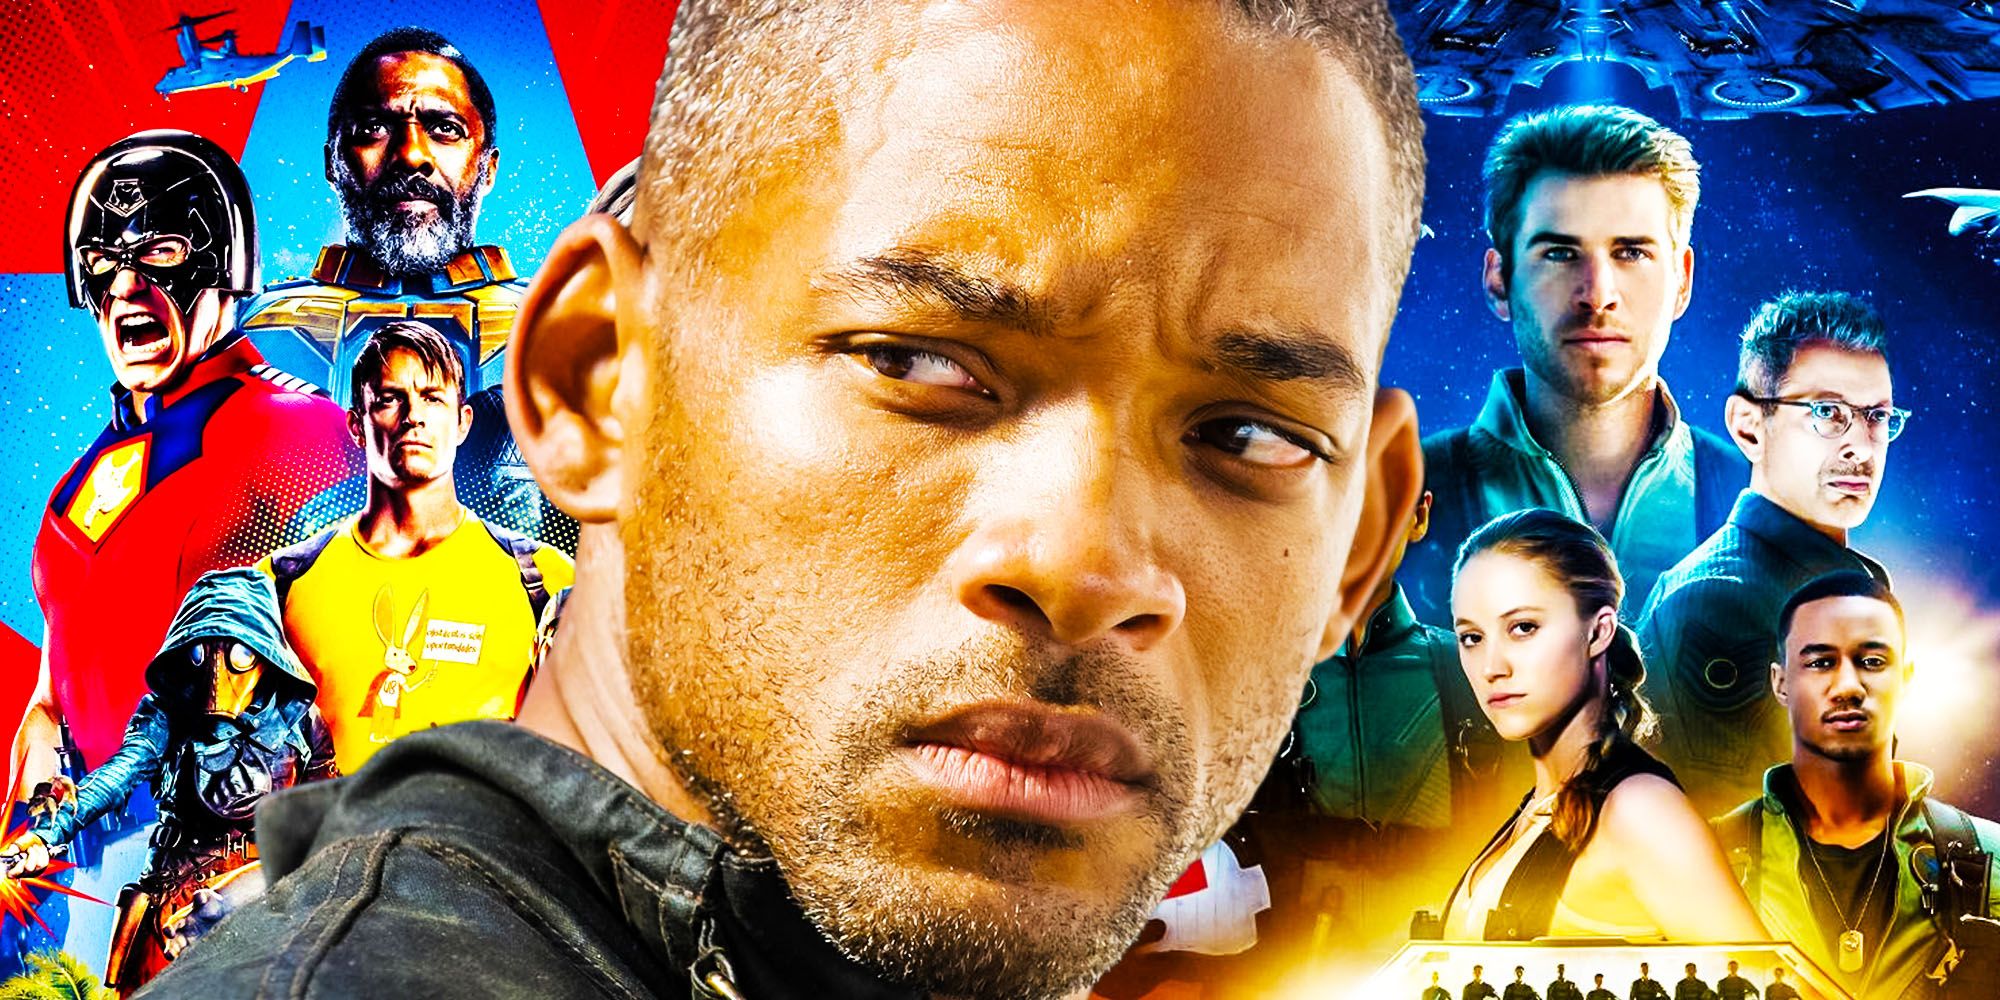 Will Smith i am legend 2 suicide squad independence day resurgence